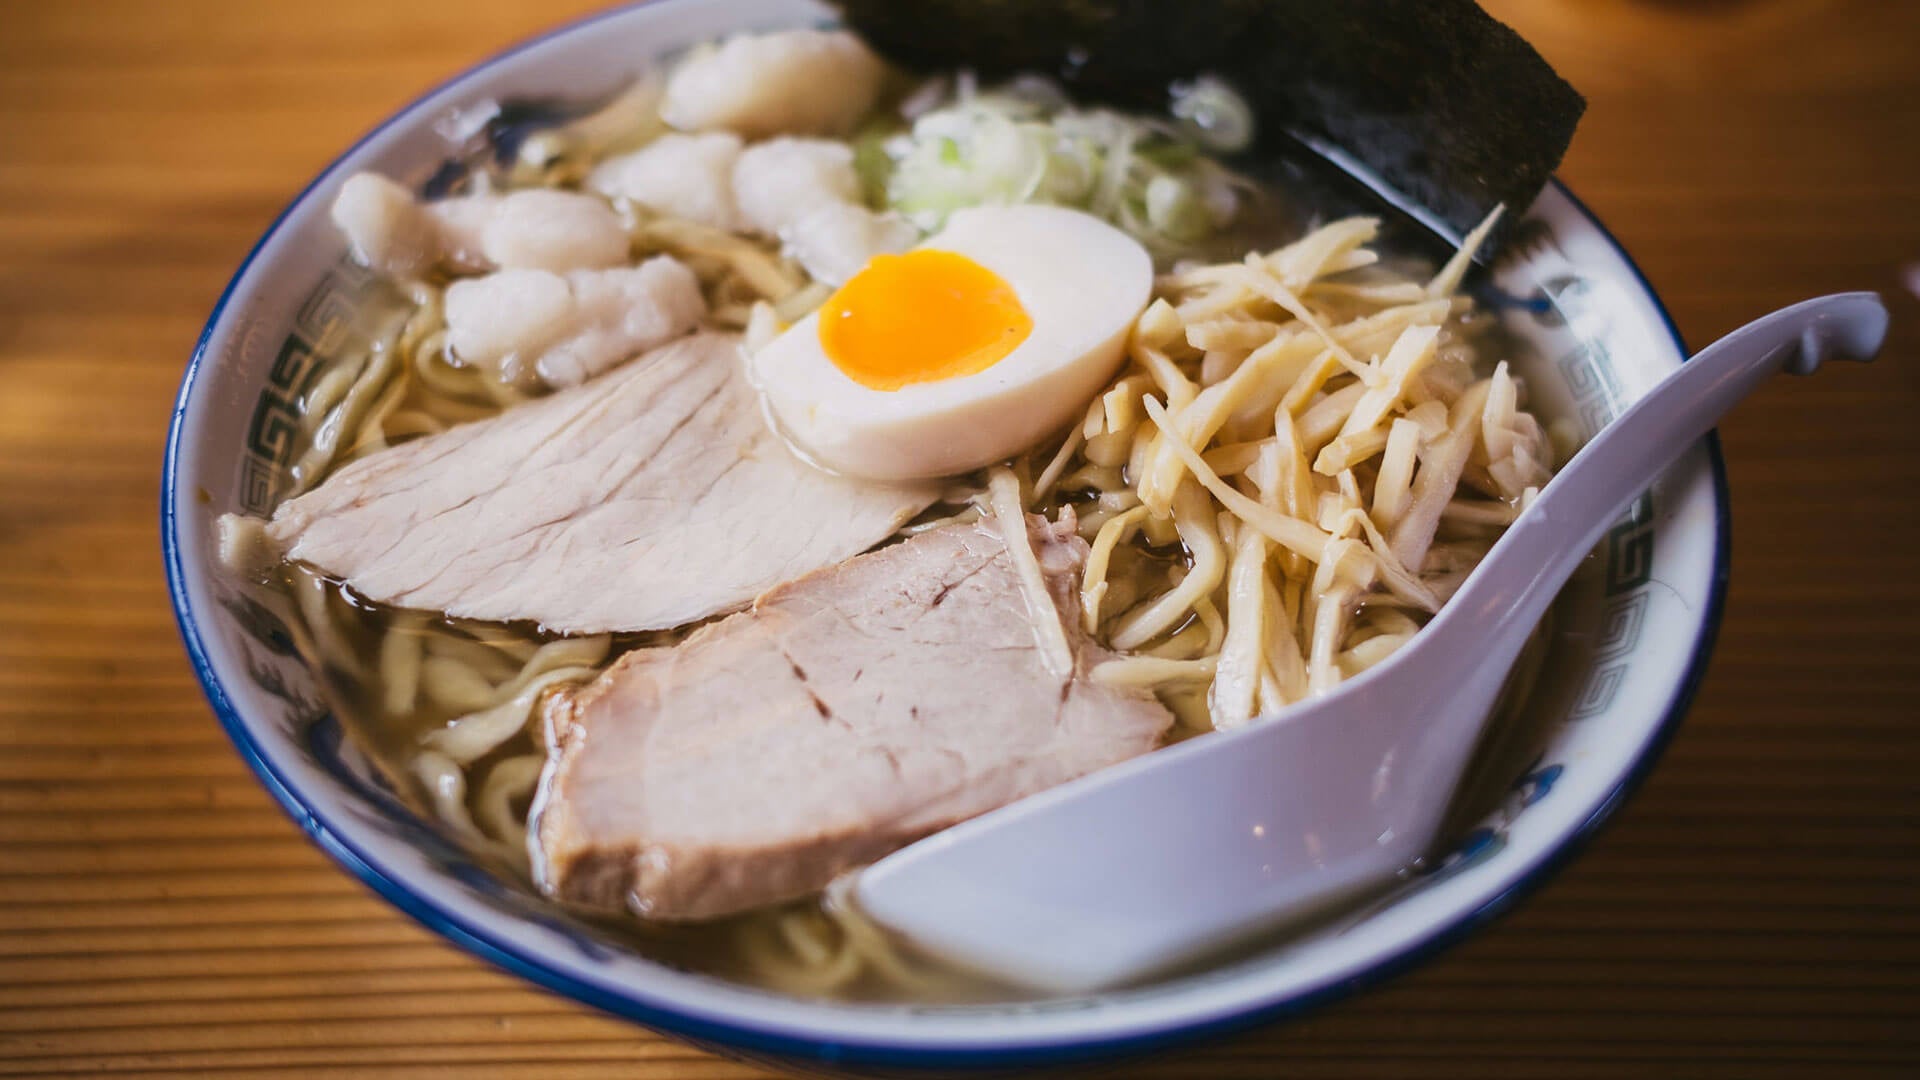 Bowl of ramen with pork, egg, and spoon.